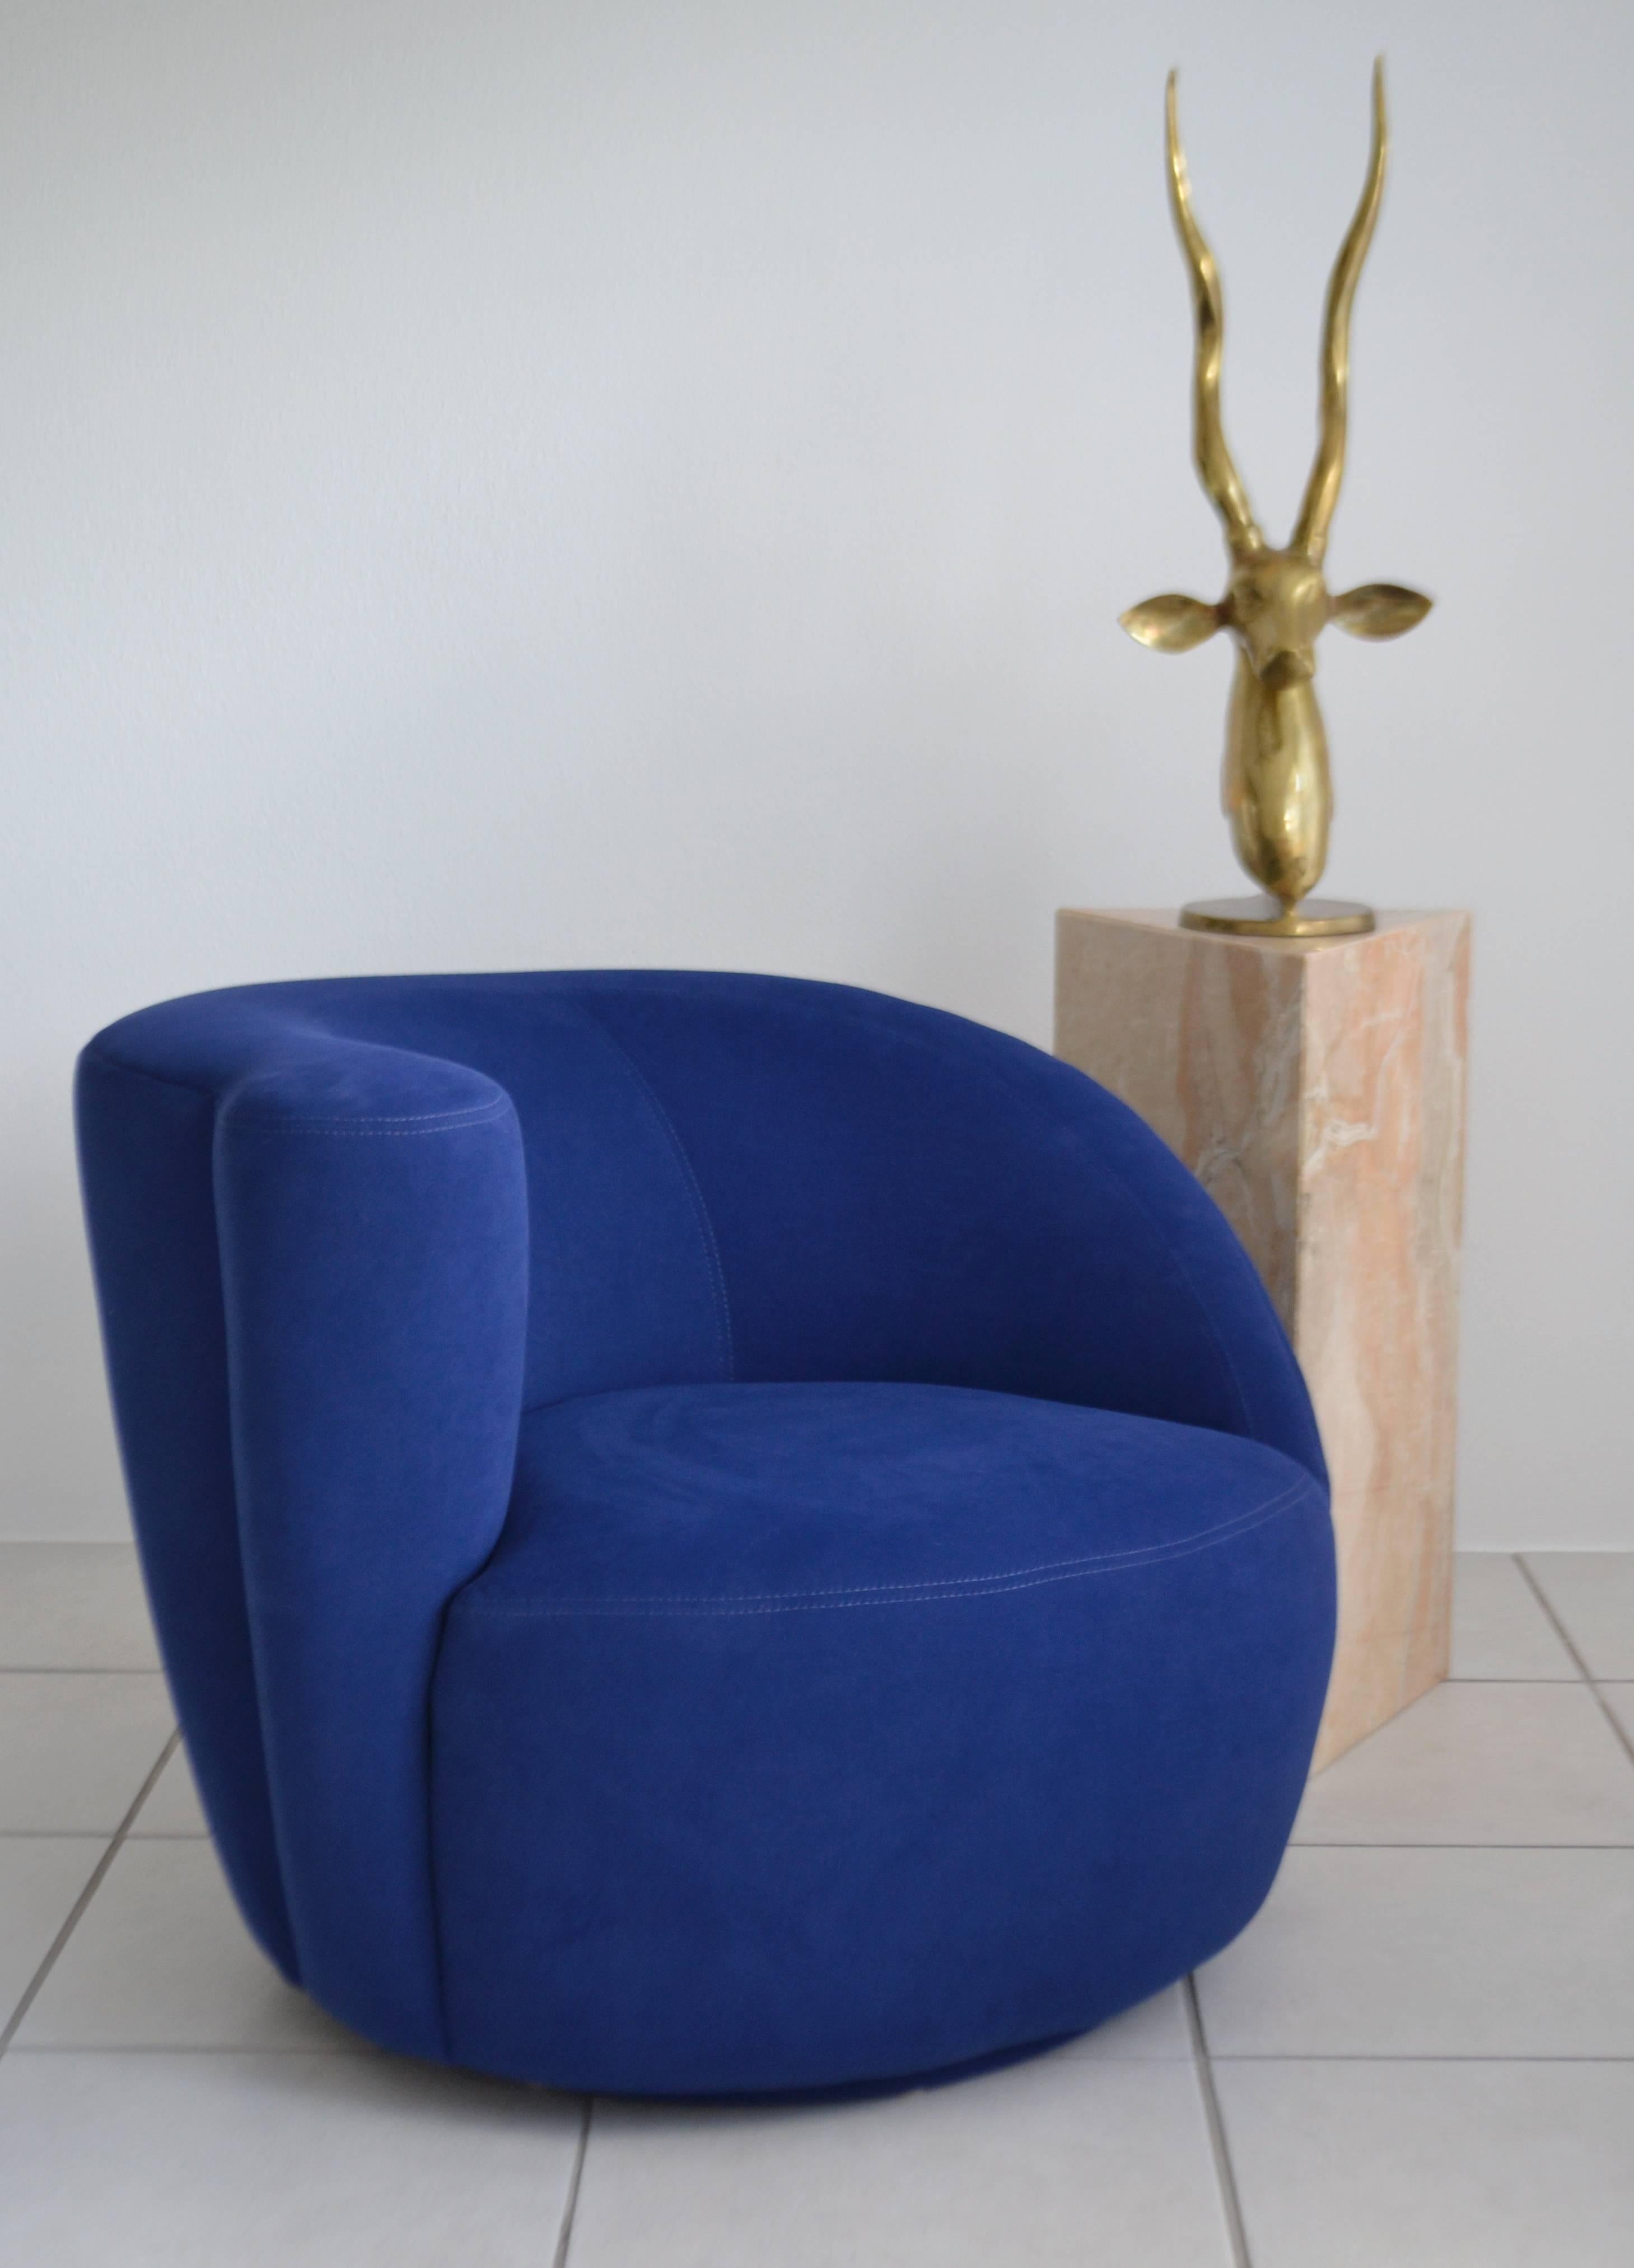 Striking pair of Postmodern sculptural Nautilus lounge chairs designed by Vladimir Kagan, circa 1980s. These glamorous swivel chairs / club chairs feature sloping, asymmetrical backs. The chair forms rest on an upholstered swivel base. These club